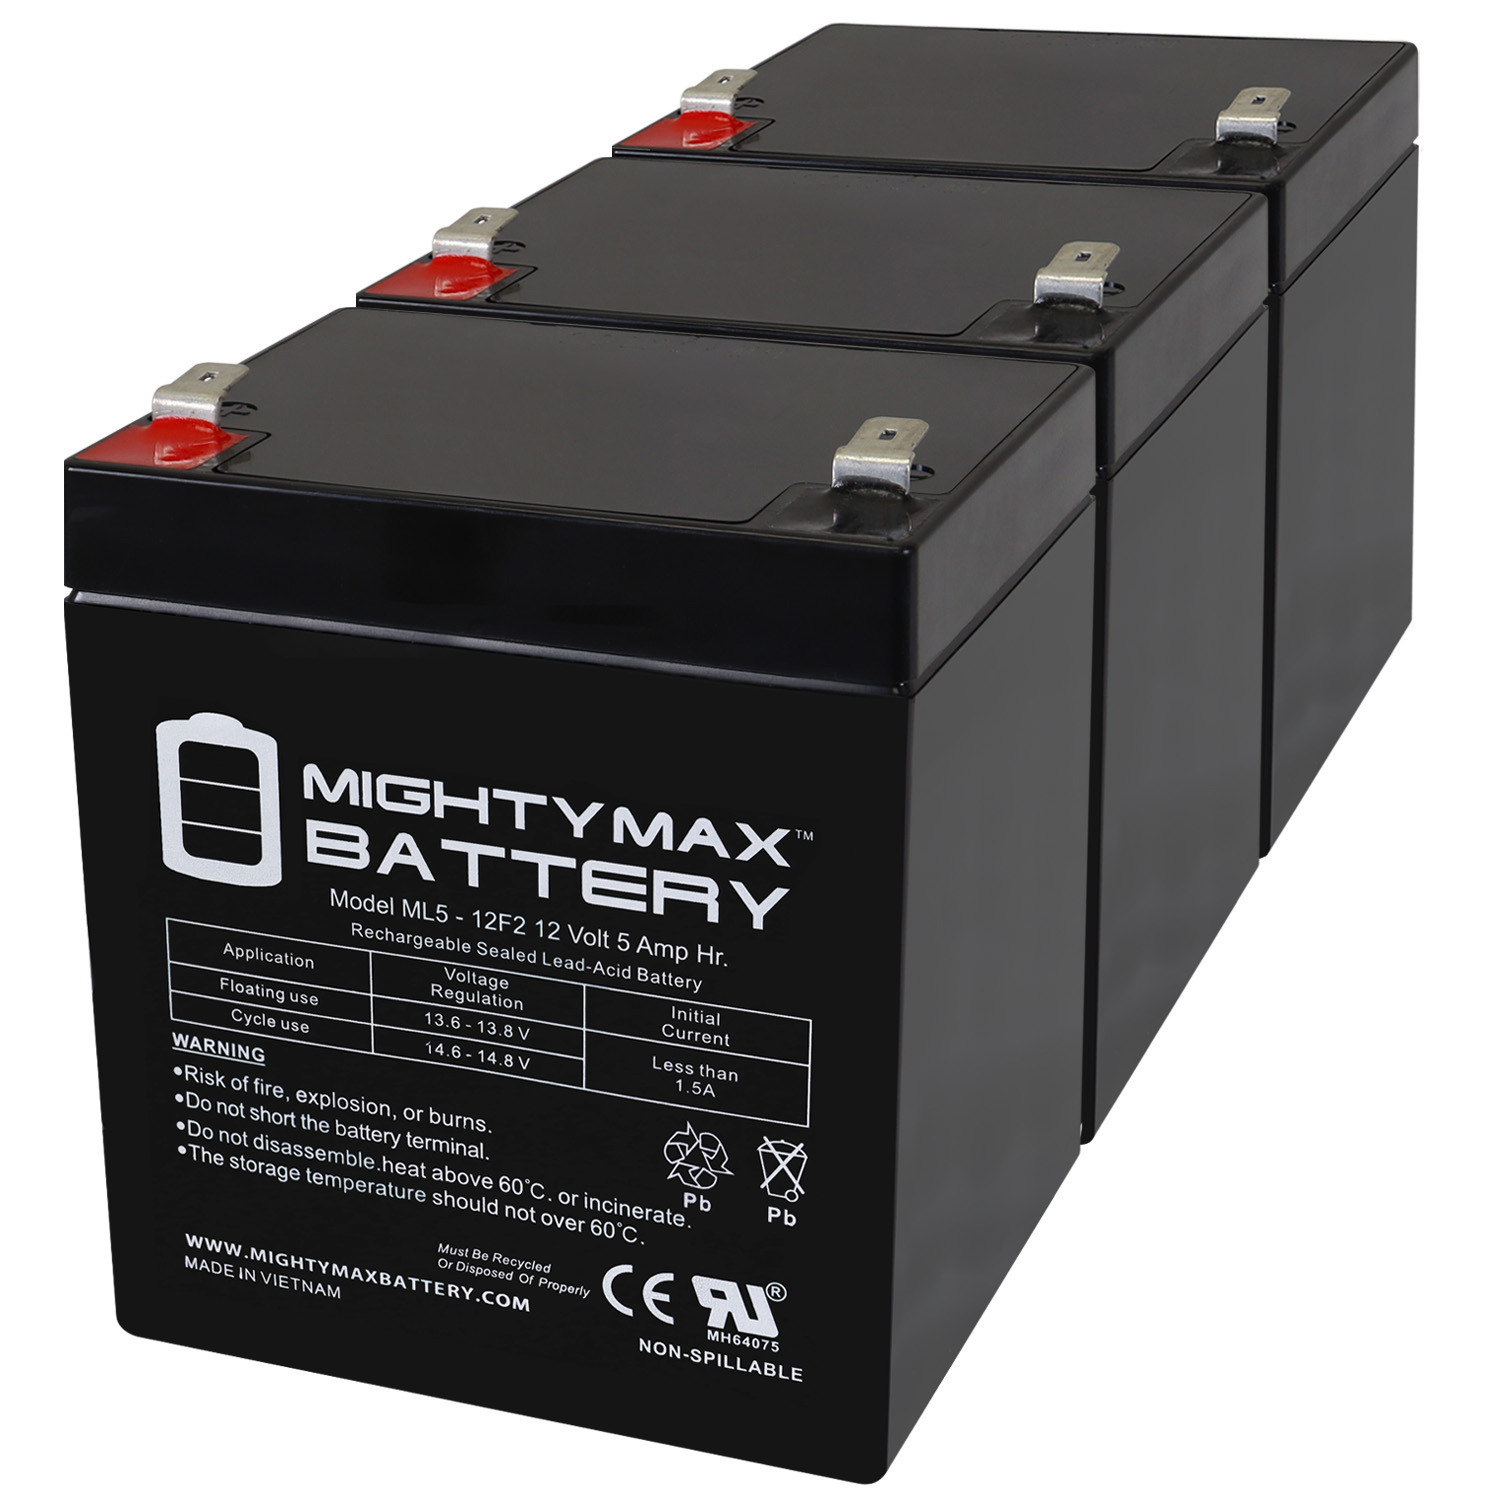 12V 5Ah F2 SLA Replacement Battery for Tripp Lite BC Personnal 280a - 3 Pack